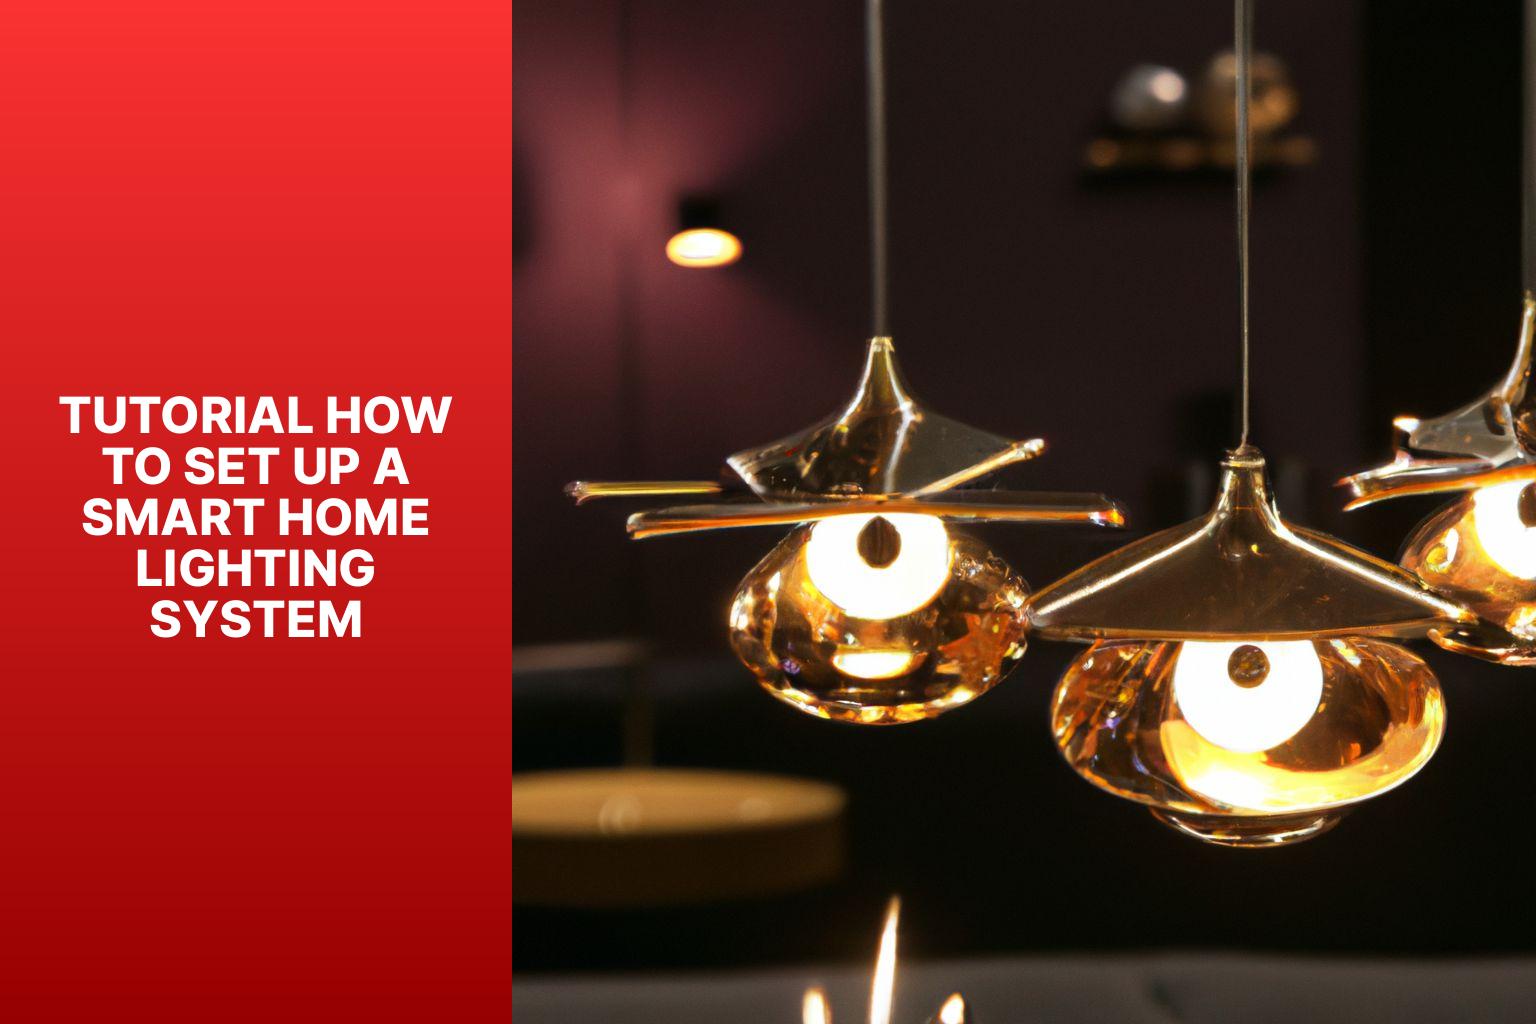 Tutorial How to Set up a Smart Home Lighting System